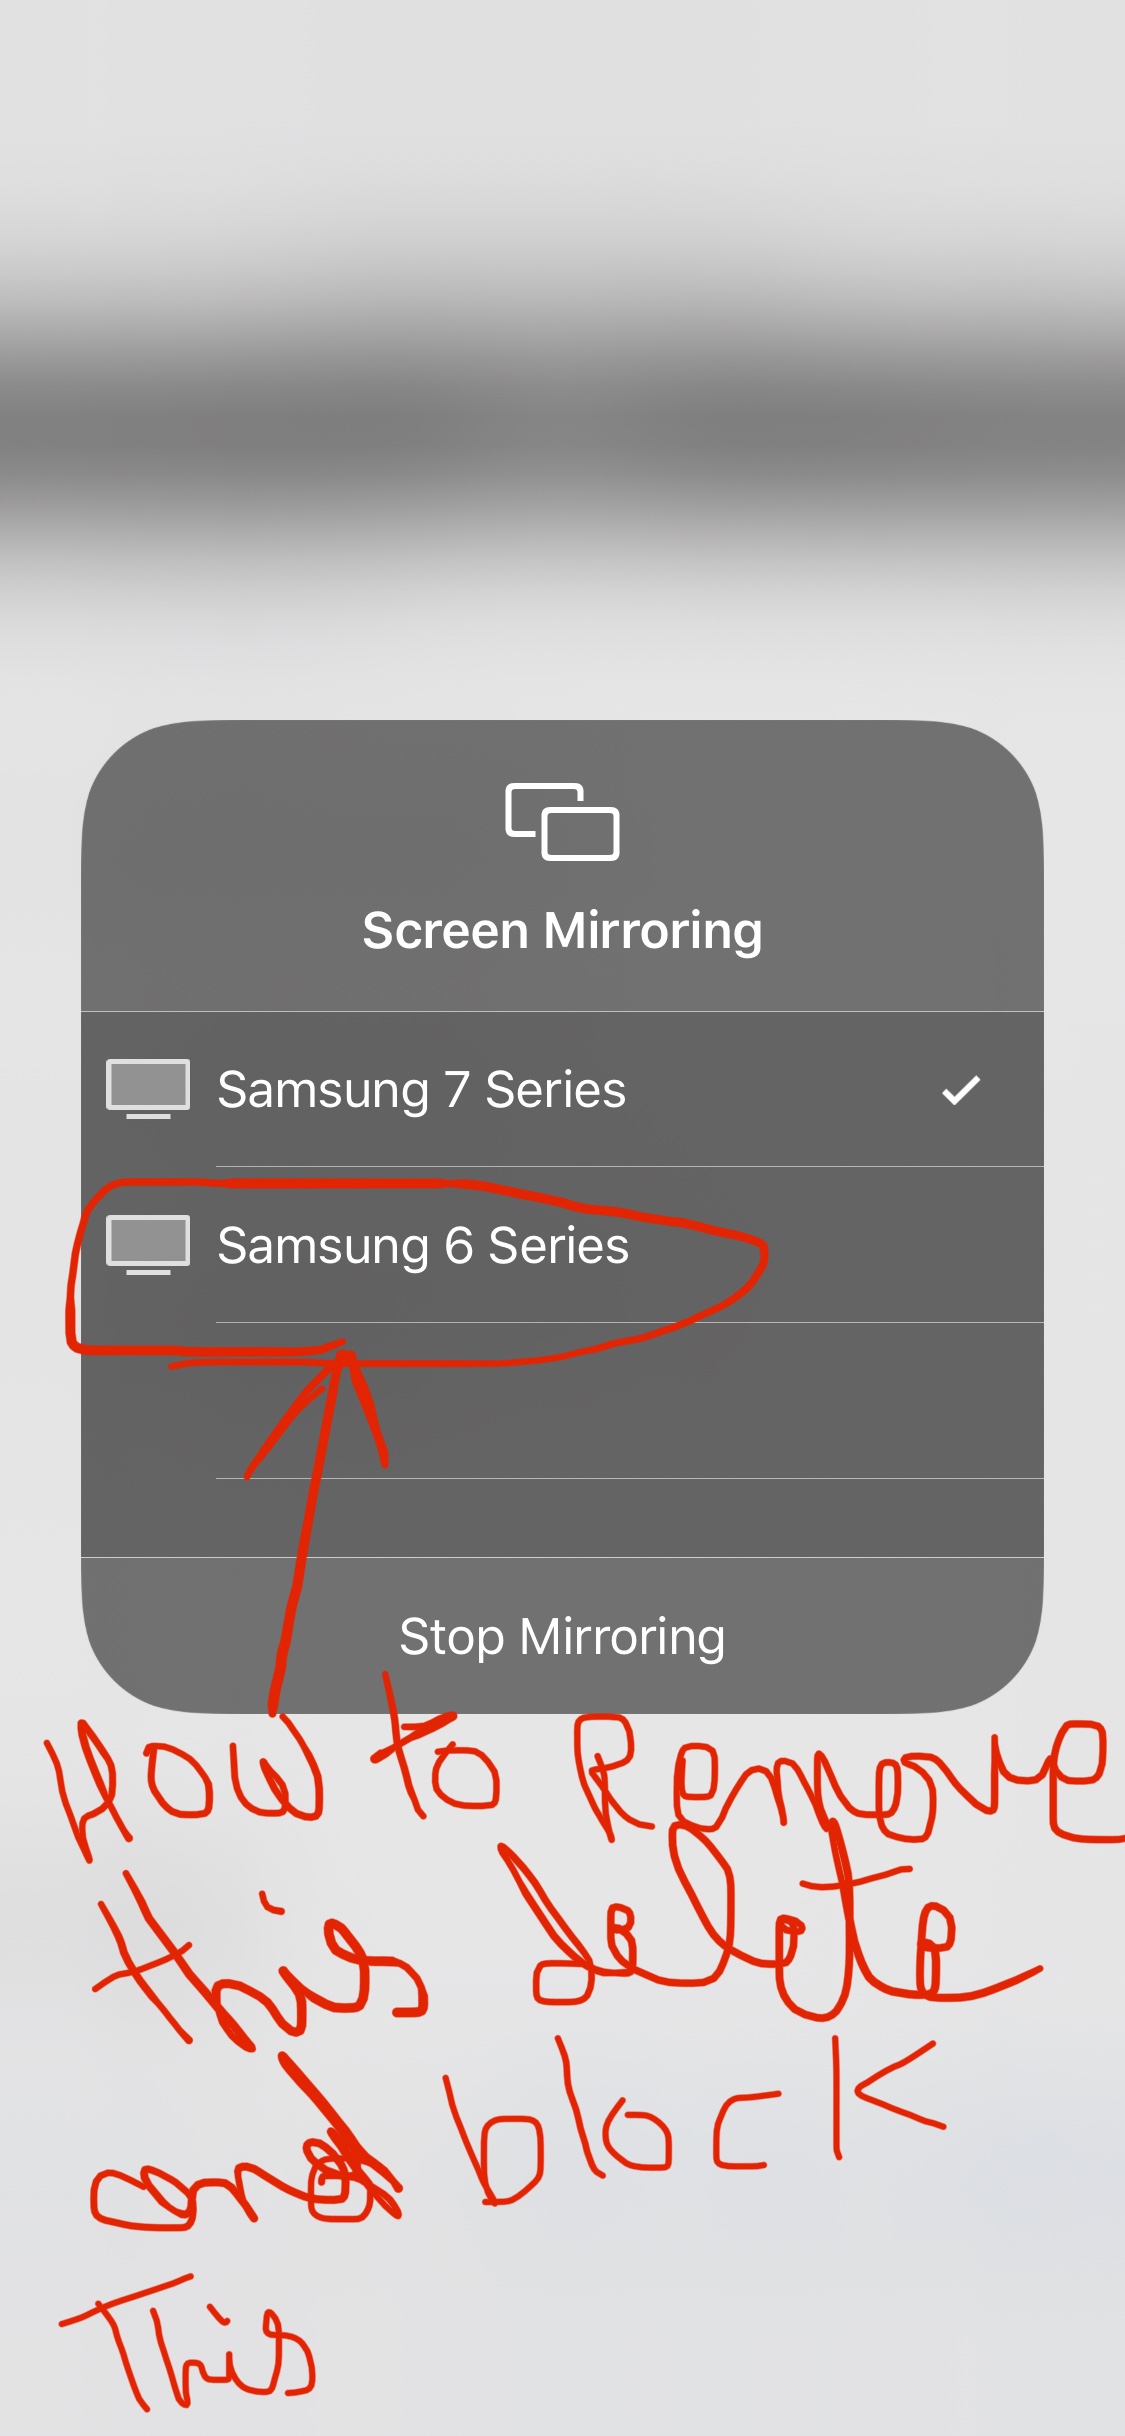 How To Remove Samsung Tv From Iphone, How To Screen Mirror Iphone Samsung 6 Series